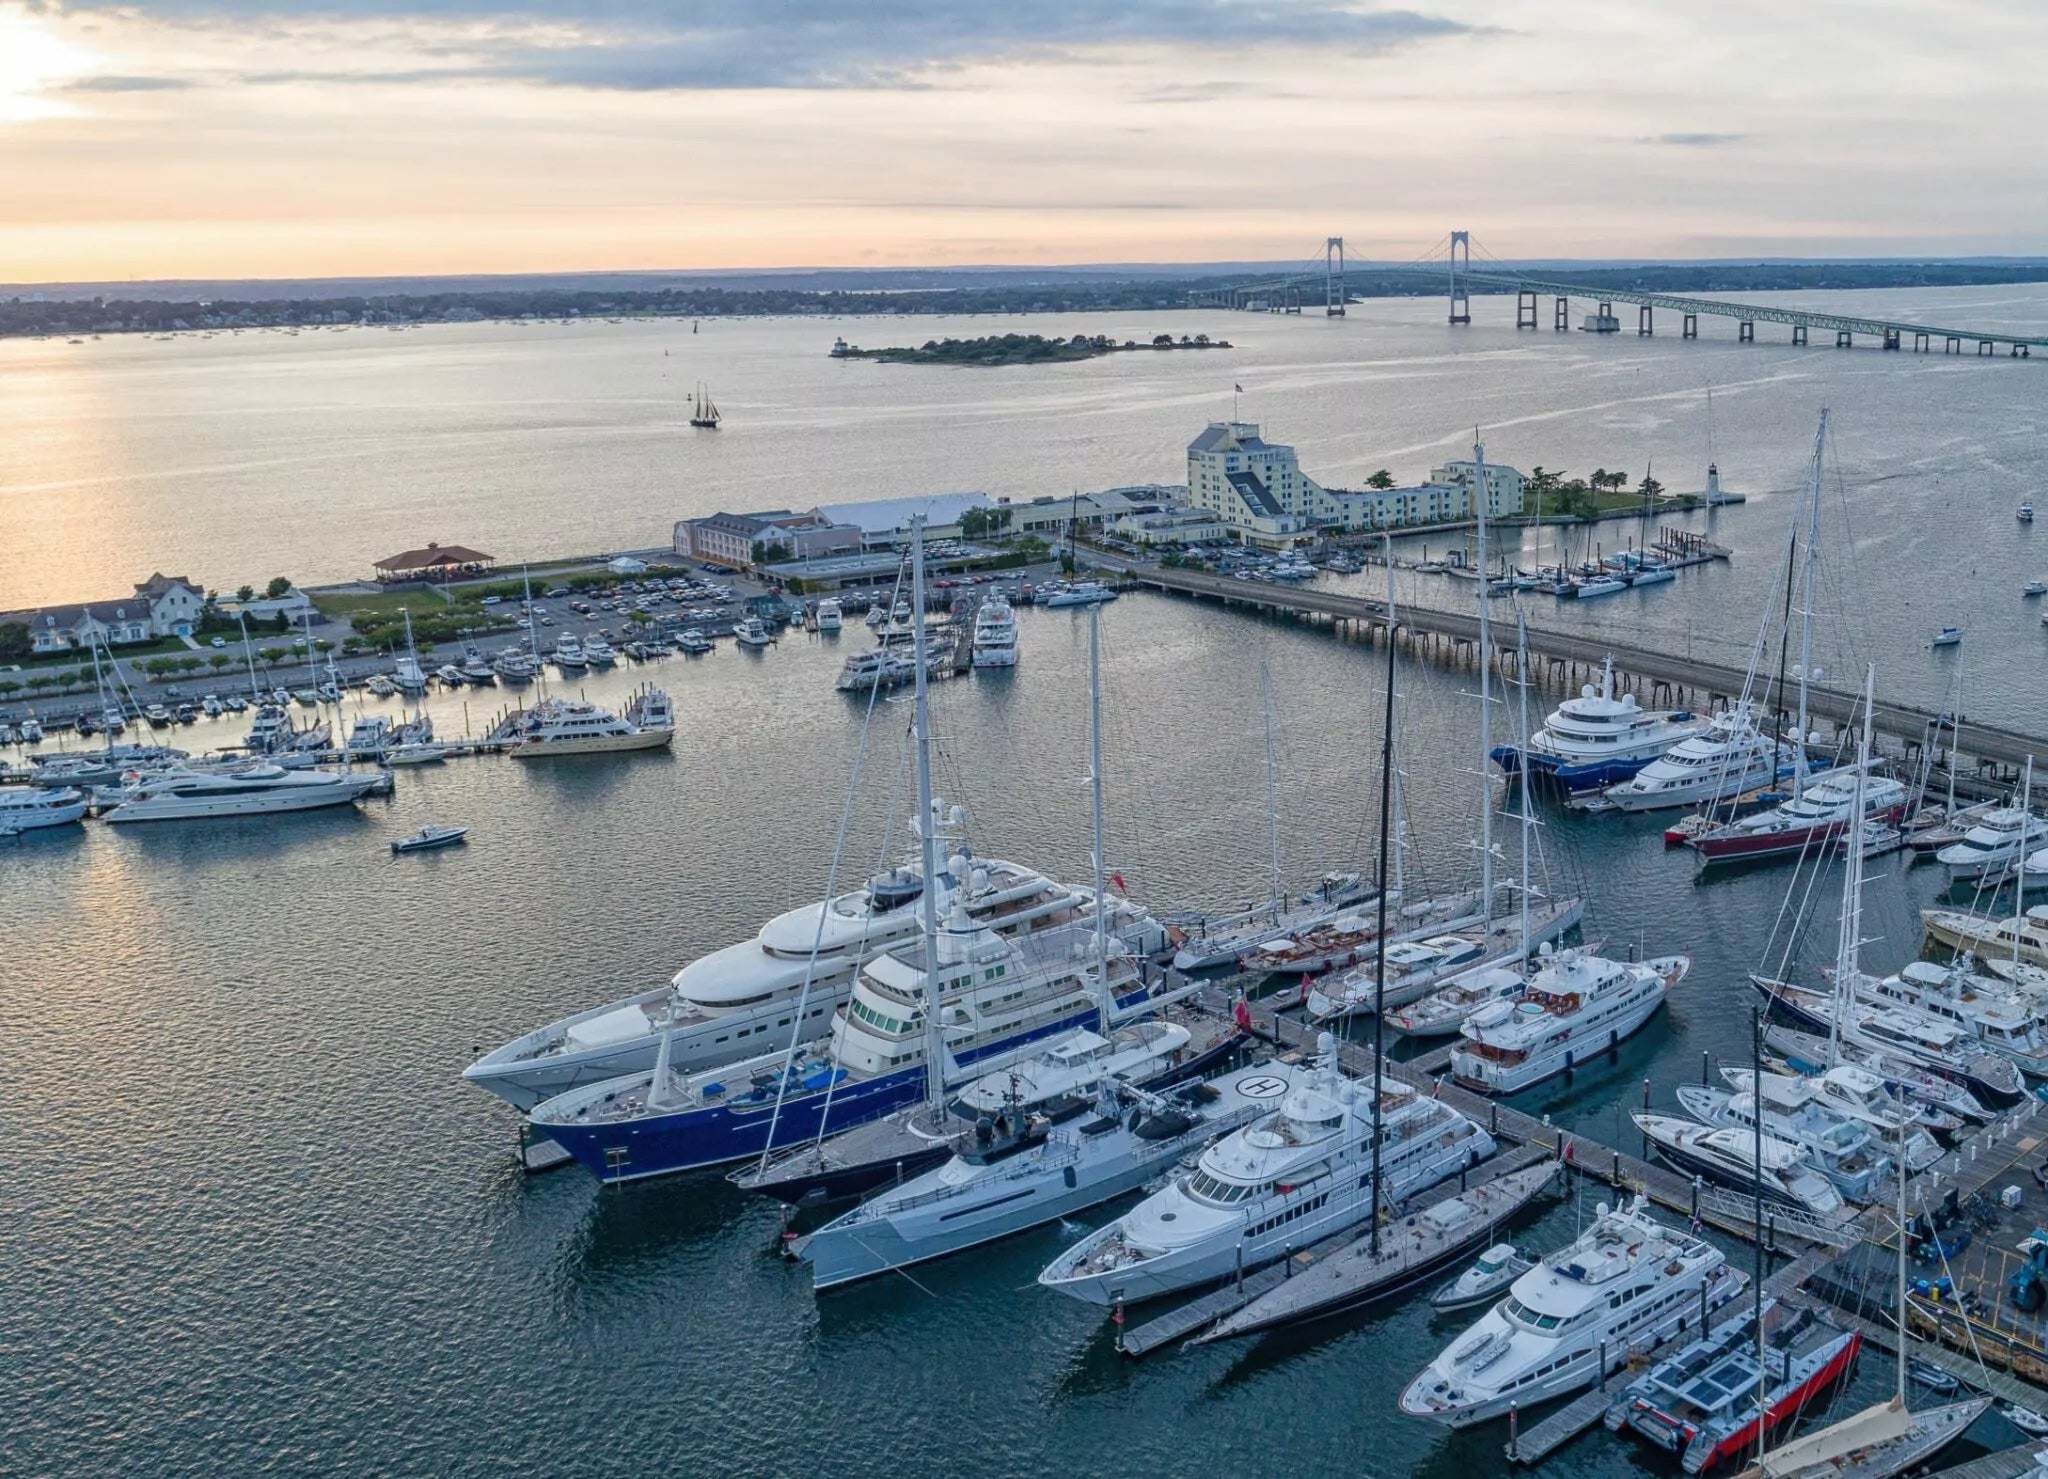 Top 10 List for Private Day Charters in Newport, RI